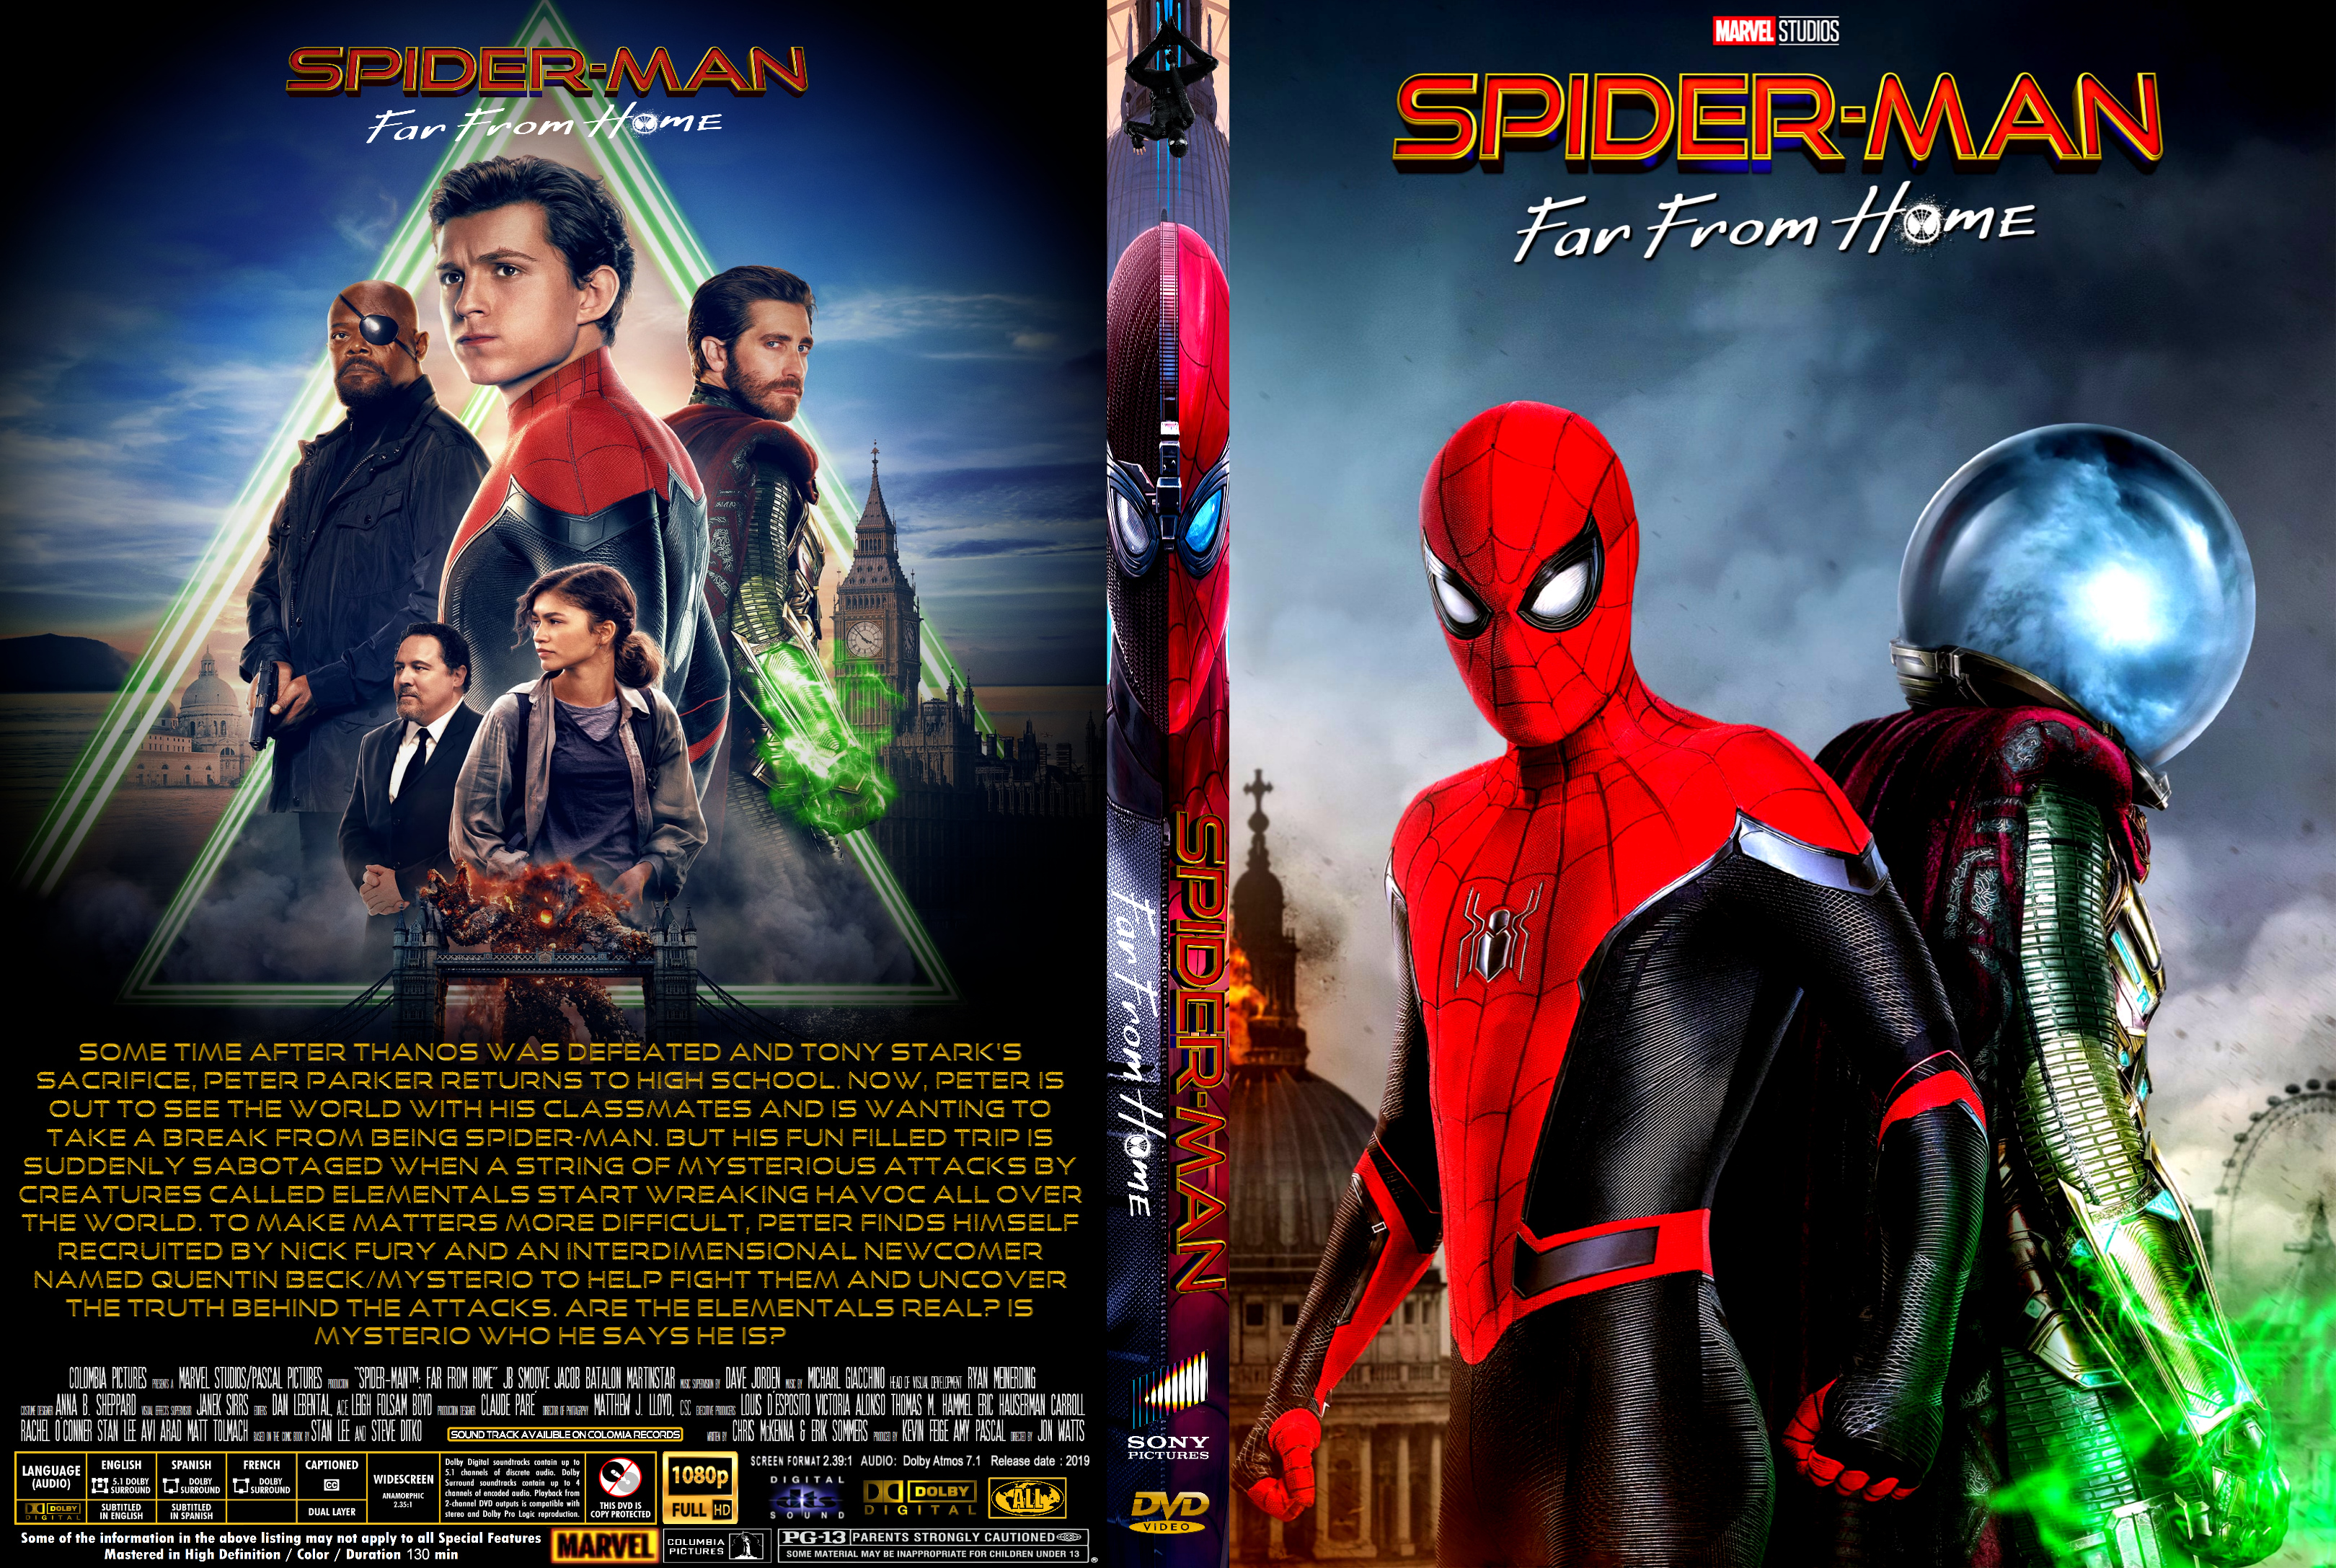 Spider far from home. Spider man far from Home. Spider man far from Home poster. Spider-man far from Home 2019 posters. Spider man far from Home Blu-ray обложка.